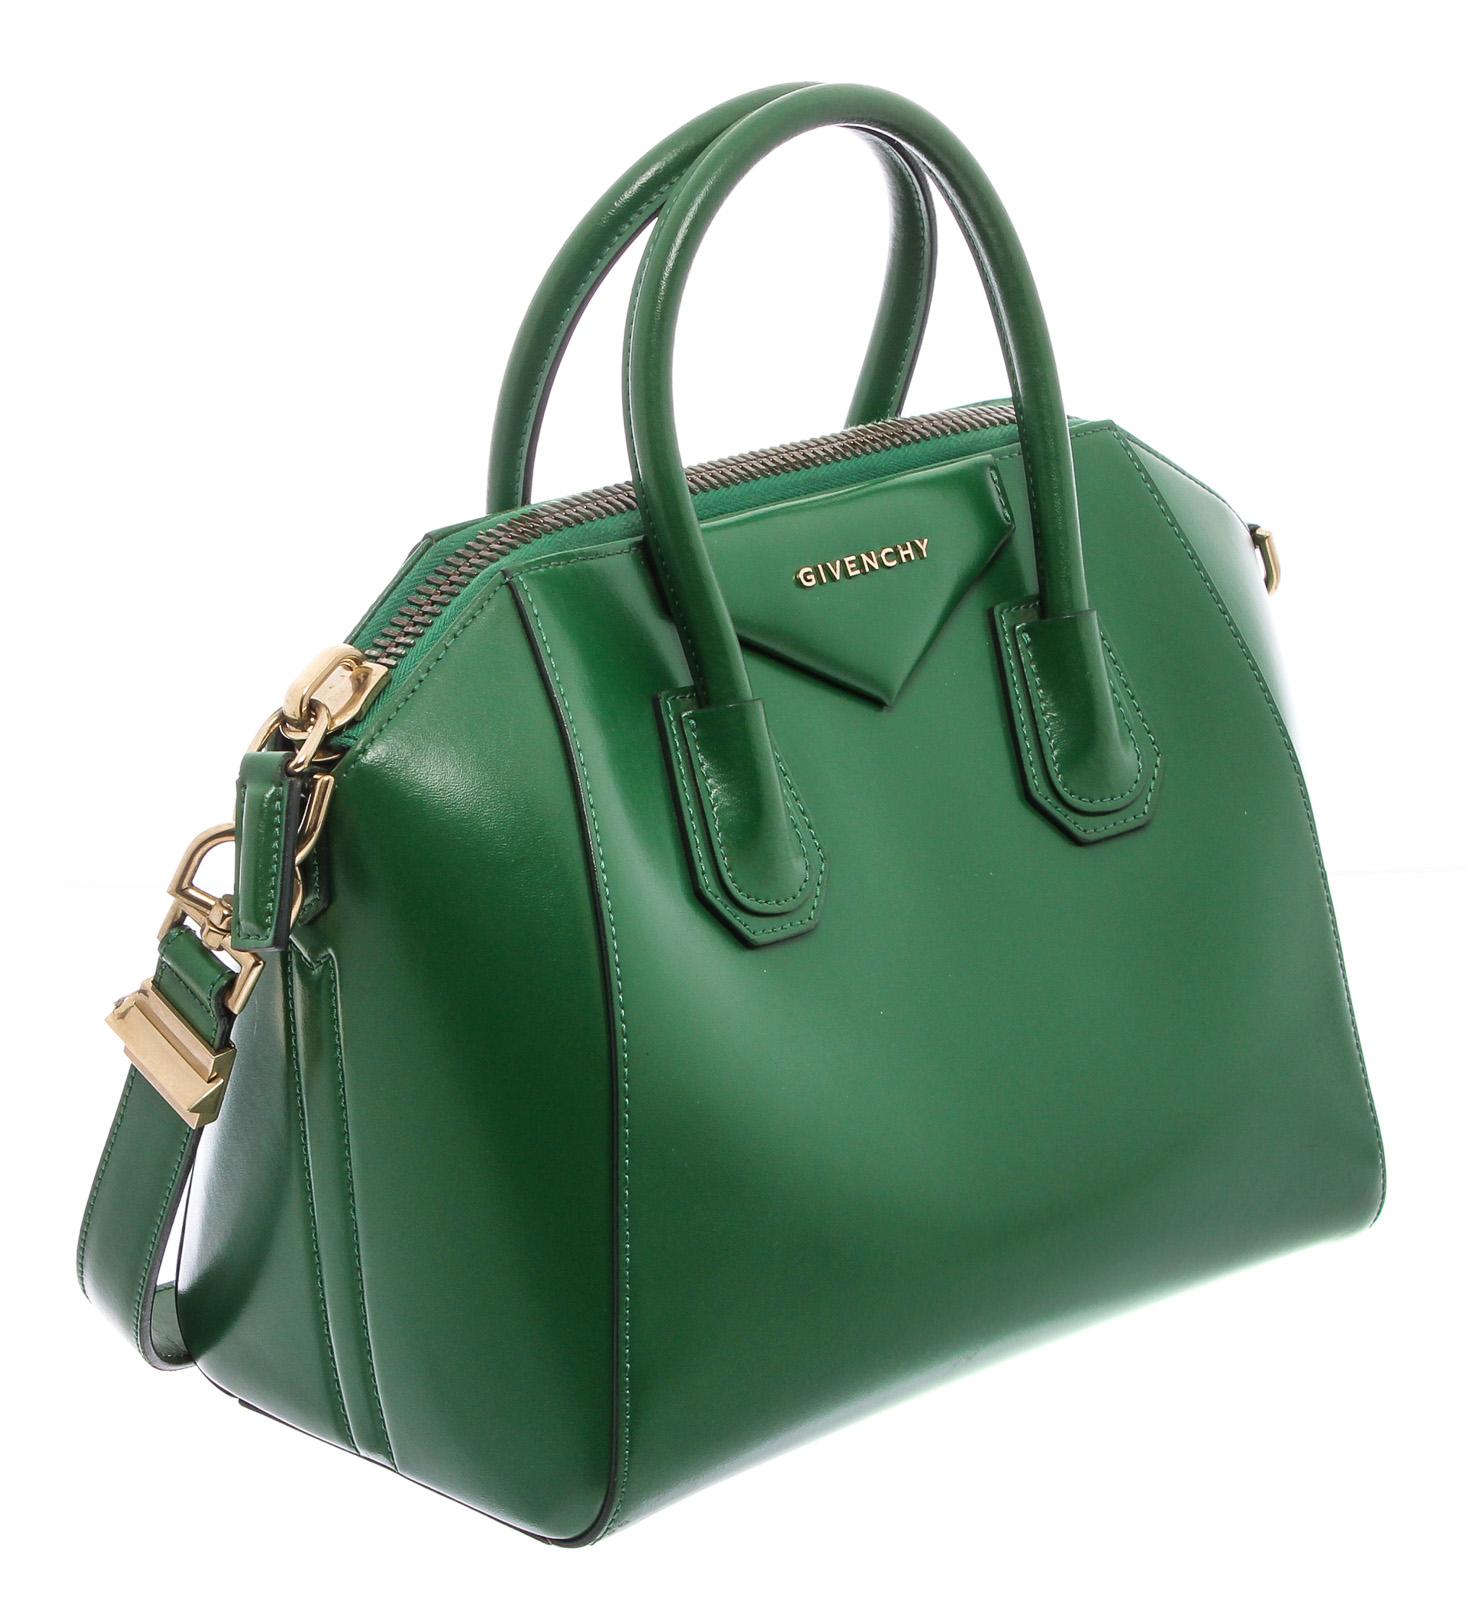 Green leather Givenchy Small Antigona satchel with silver-tone hardware, dual rolled top handles, detachable flat shoulder strap, logo adornment at front, black woven lining, three pockets at interior walls; one with zip closure and zip closure at